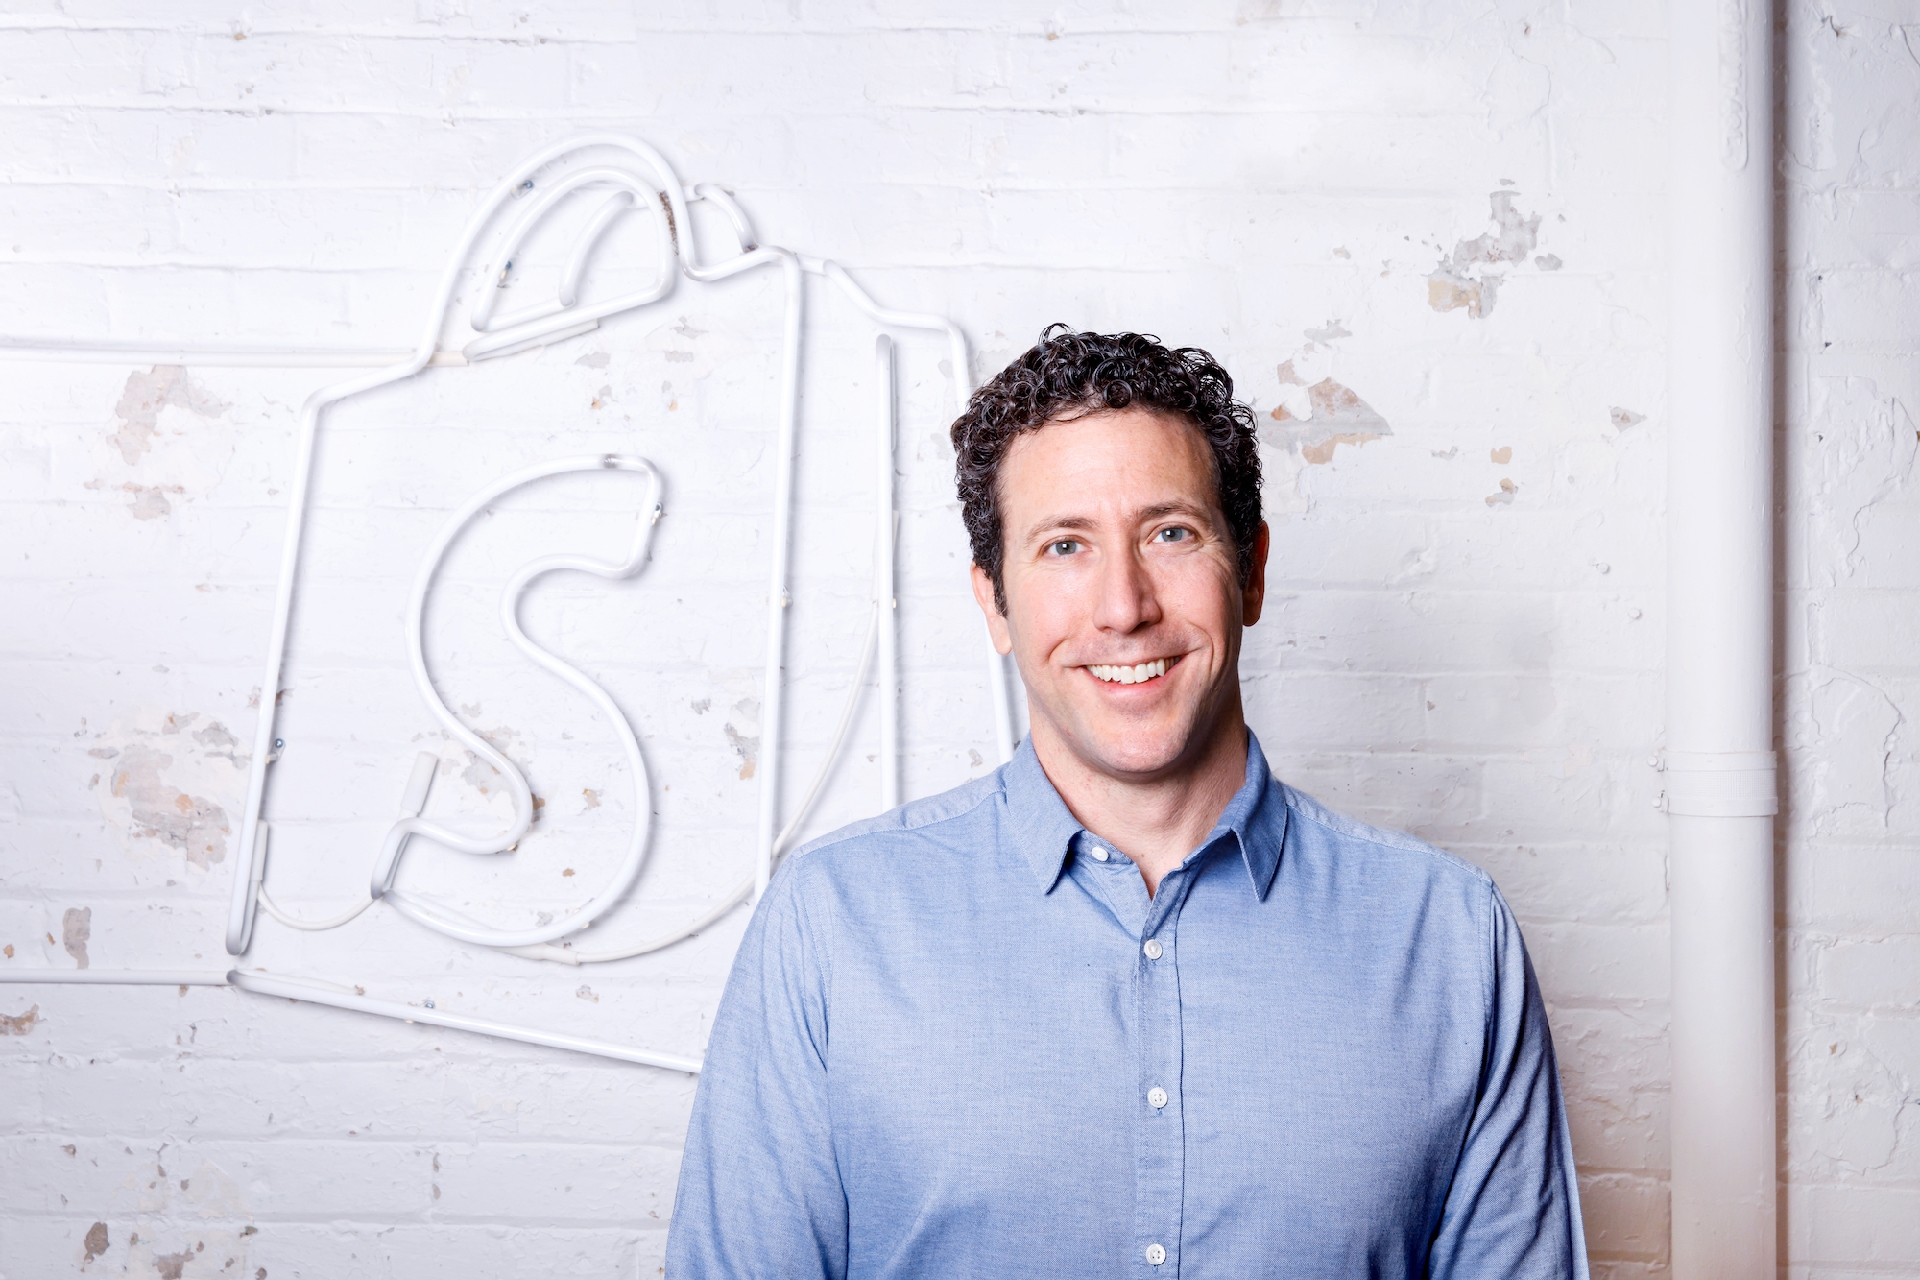 Photo of Daniel Debow at Shopify office